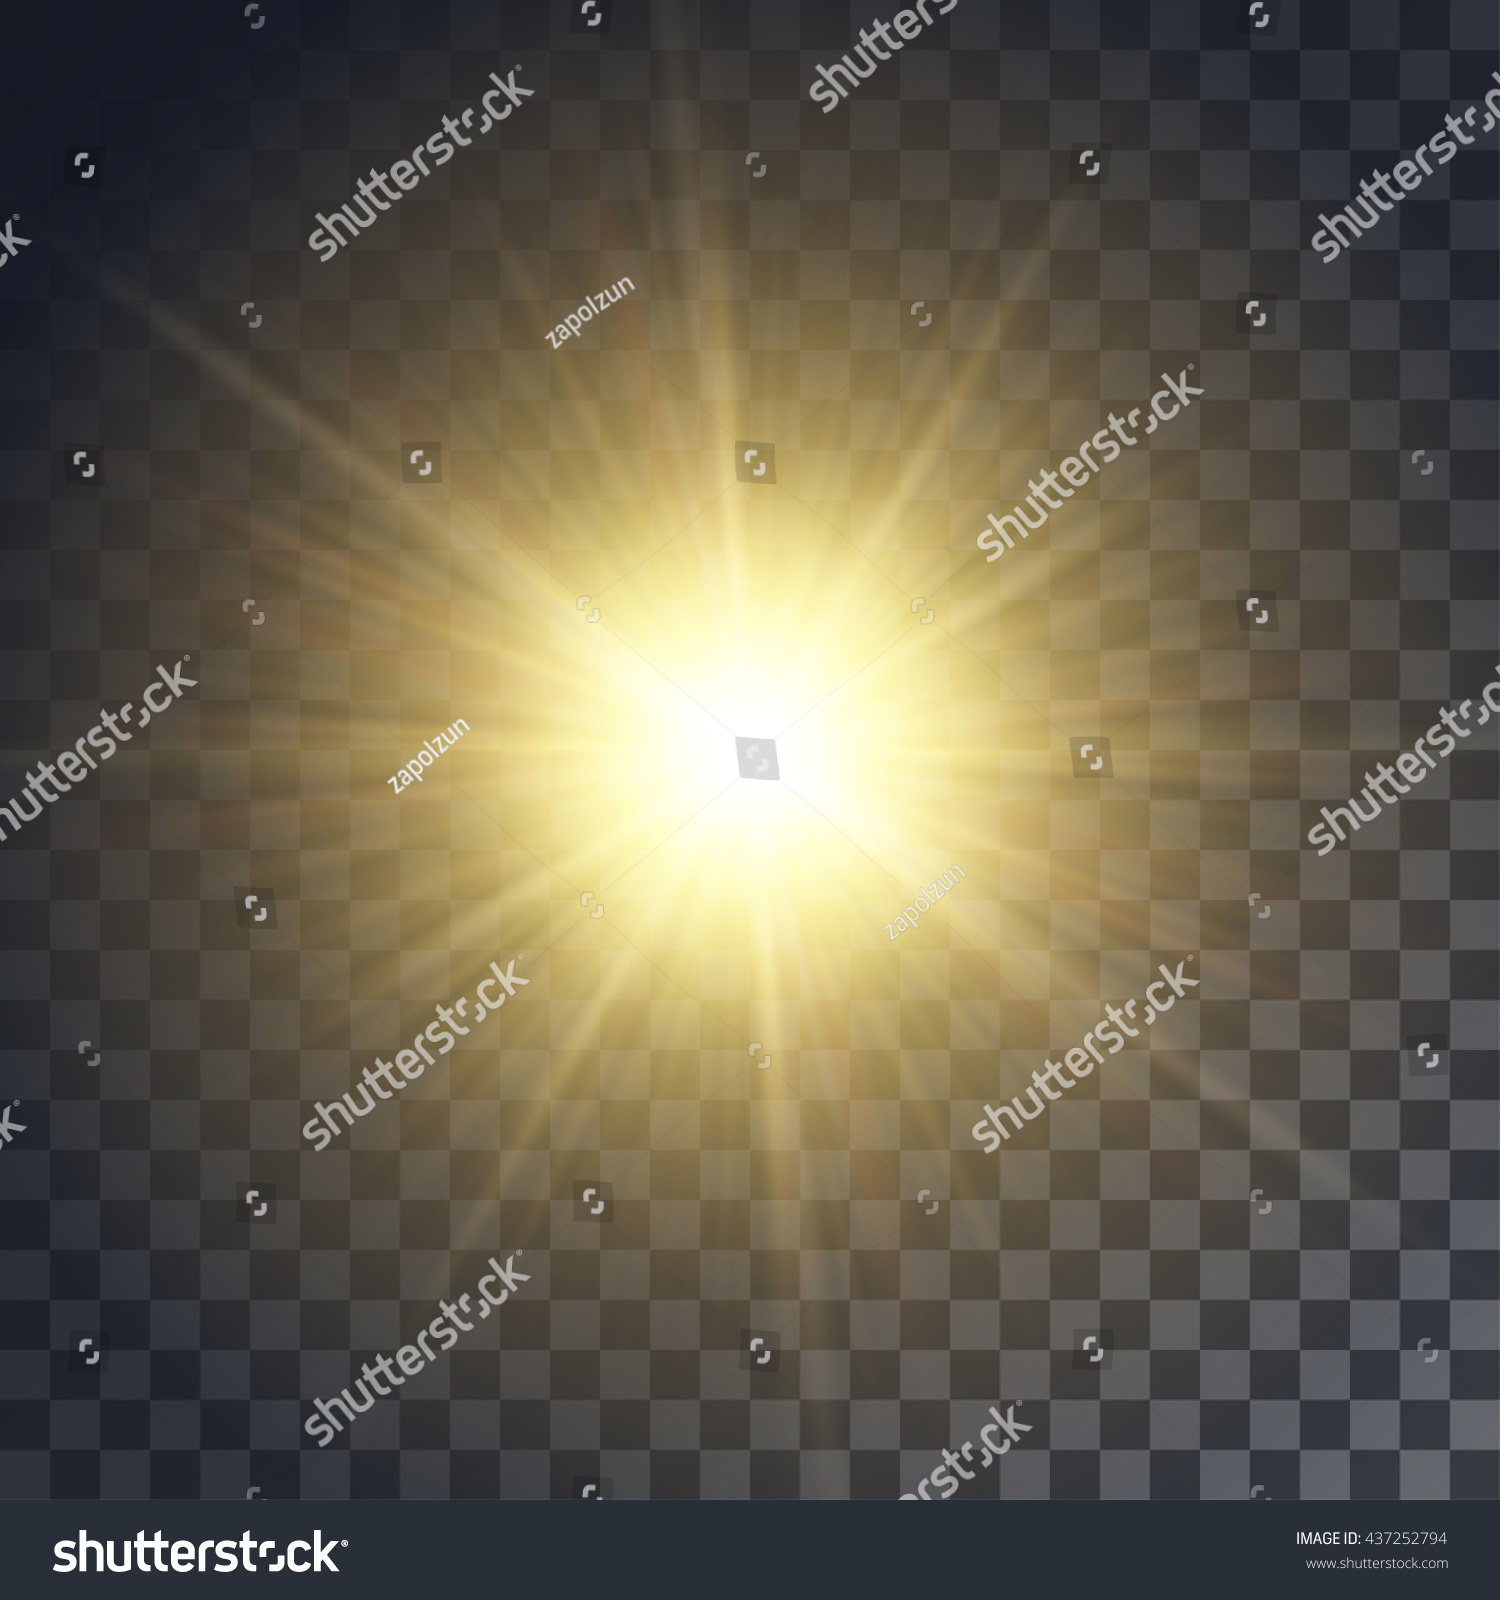 Vector yellow sun with rays and glow on transparent like background. Contains clipping mask. #437252794